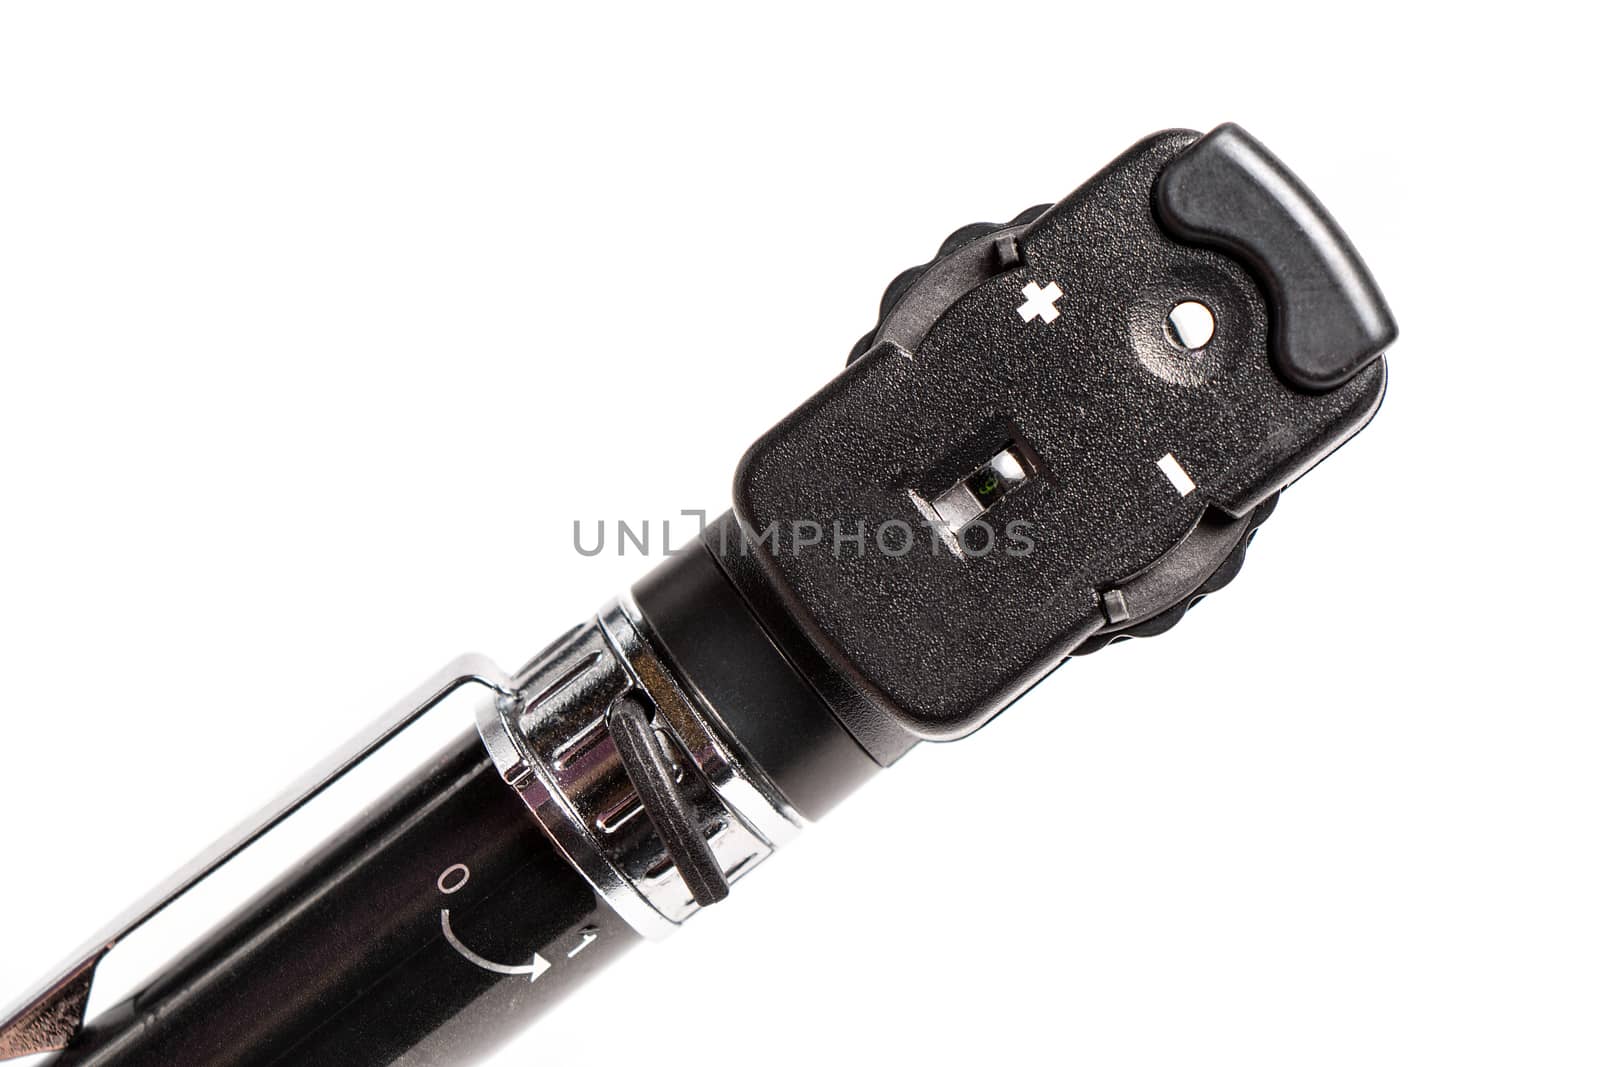 Ophthalmoscope close up, isolated